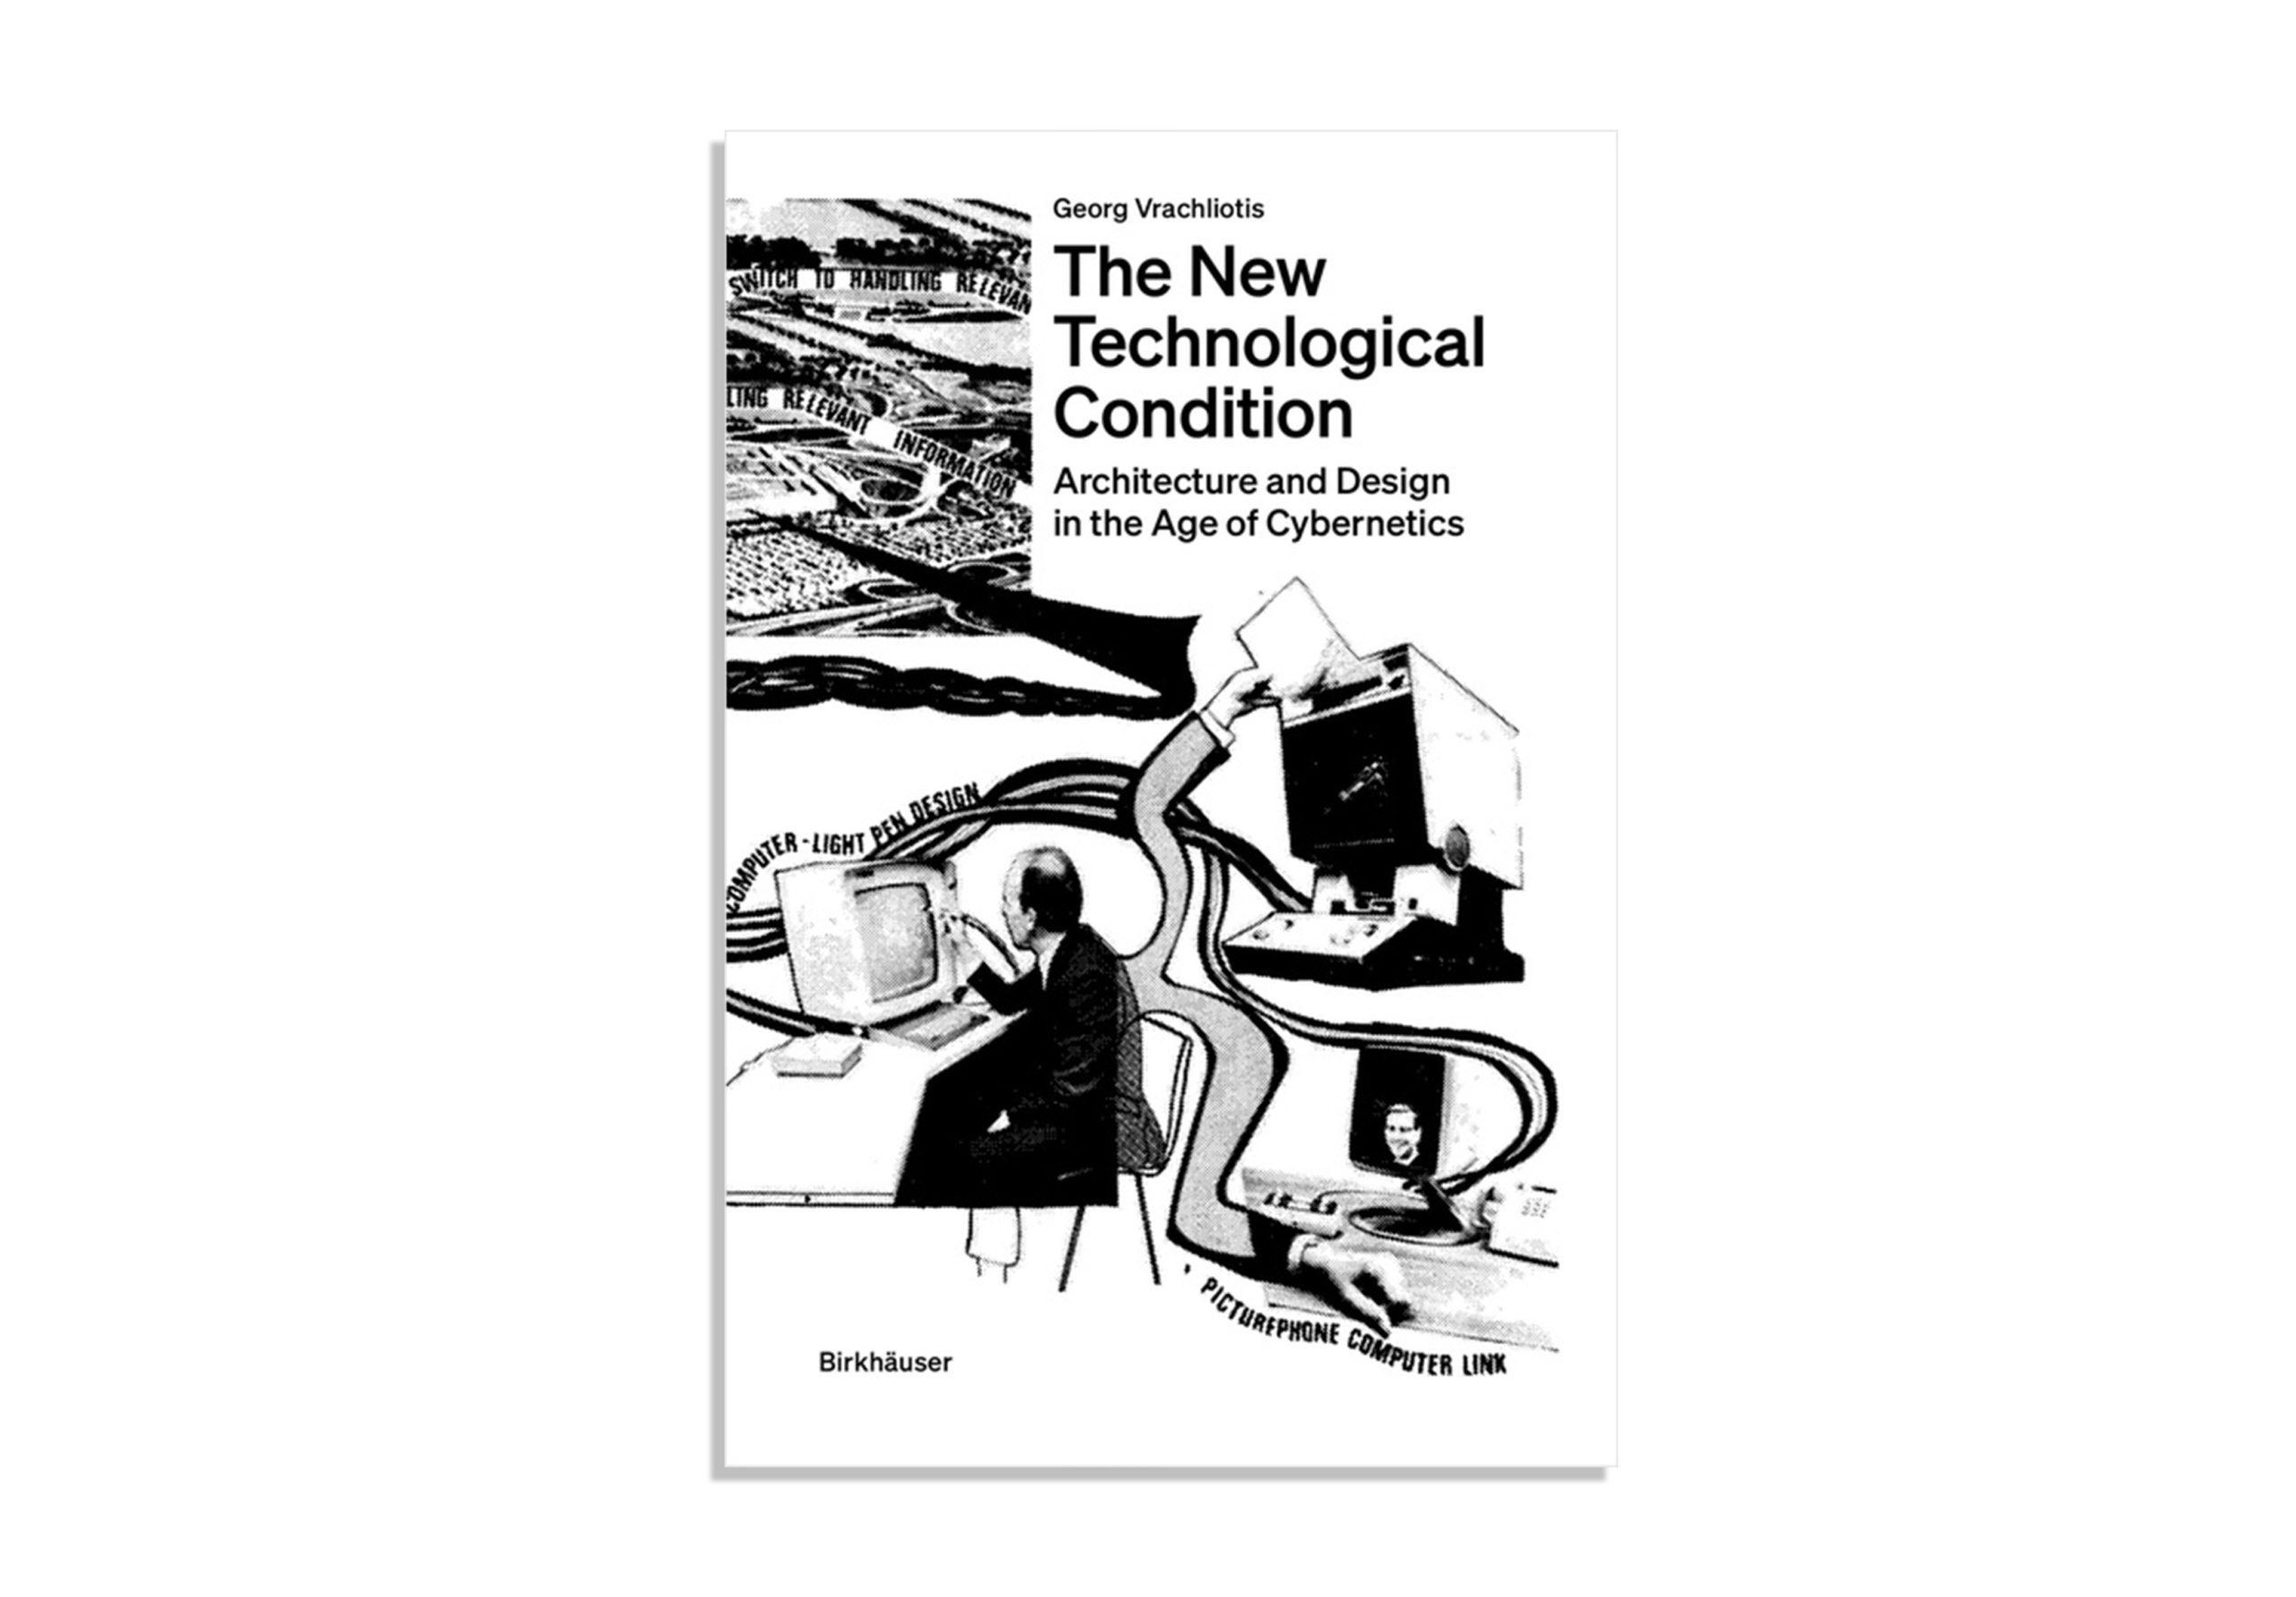 The New Technological Condition | Book Presentation and Discussion